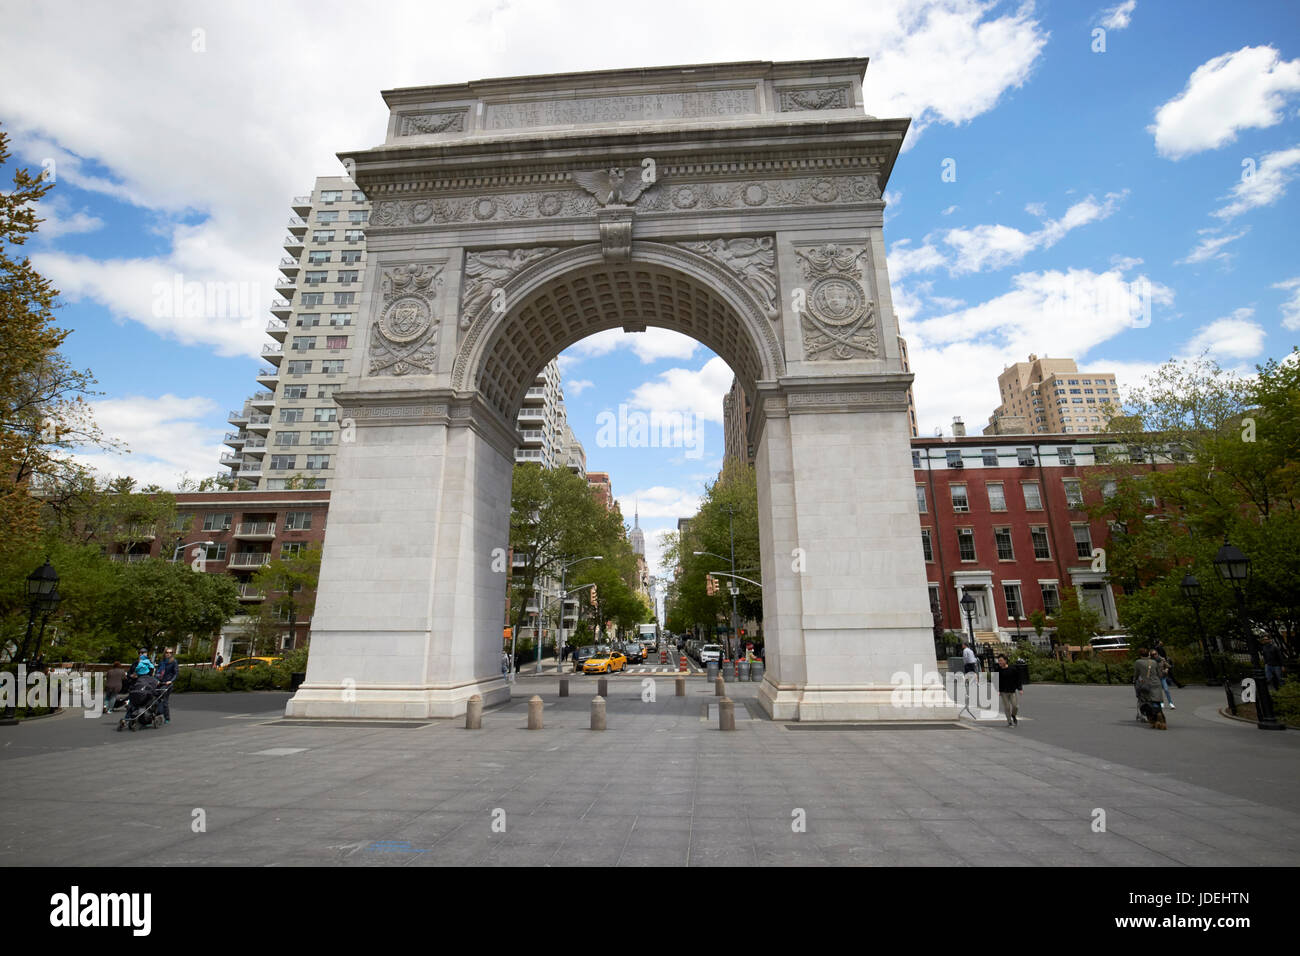 Washington Square arch New York USA Banque D'Images